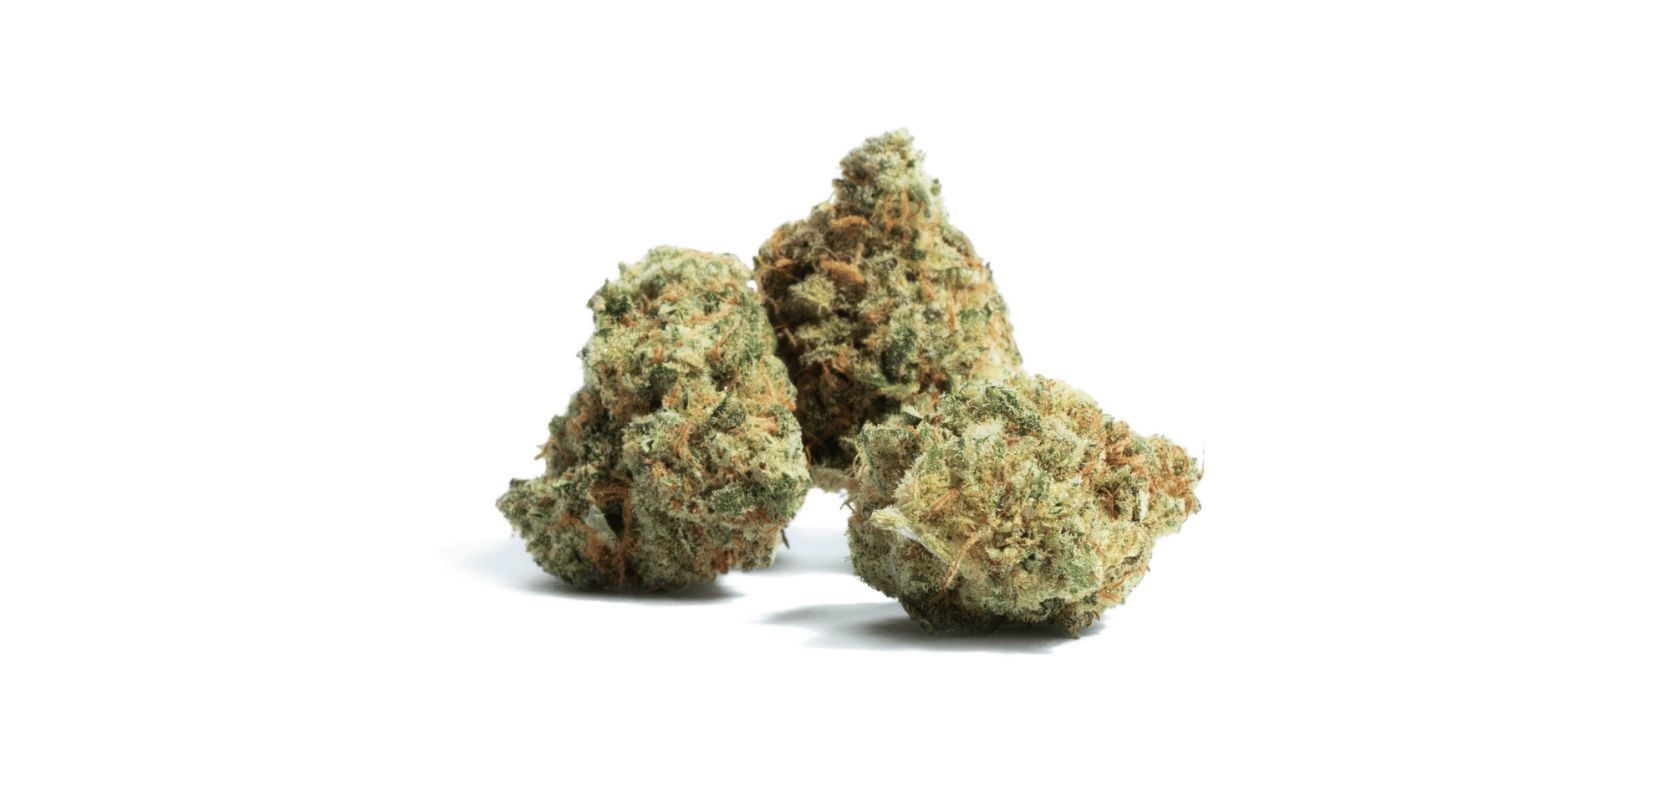 The Amnesia Haze is a cult legend, like Afghani and the notorious Blue Dream strain. 